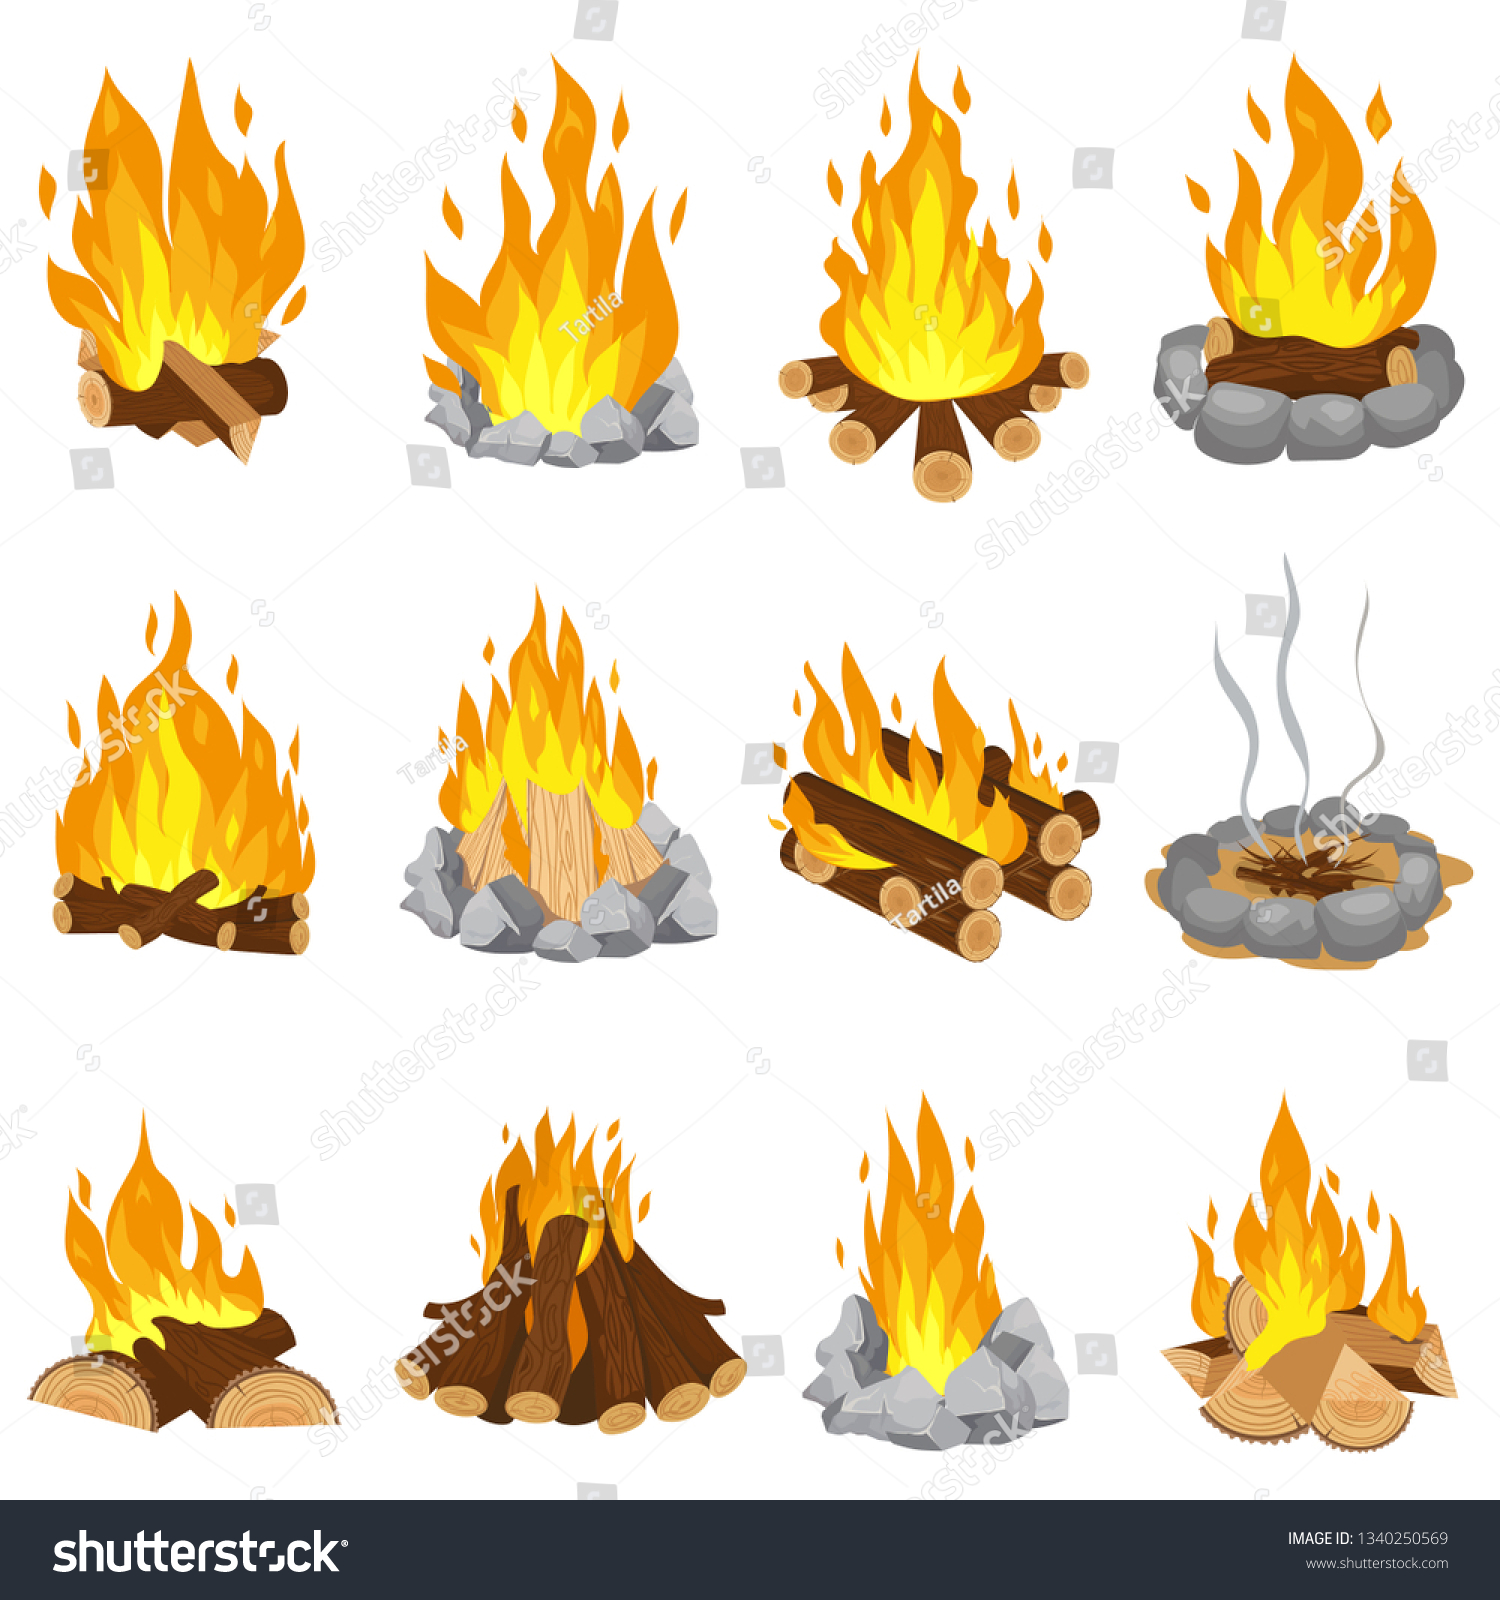 Wood campfire. Outdoor bonfire, fire burning wooden logs and camping stone fireplace. Firewood flames, burn campfire or bonfire flame fireplace. Cartoon vector illustration isolated symbols set #1340250569